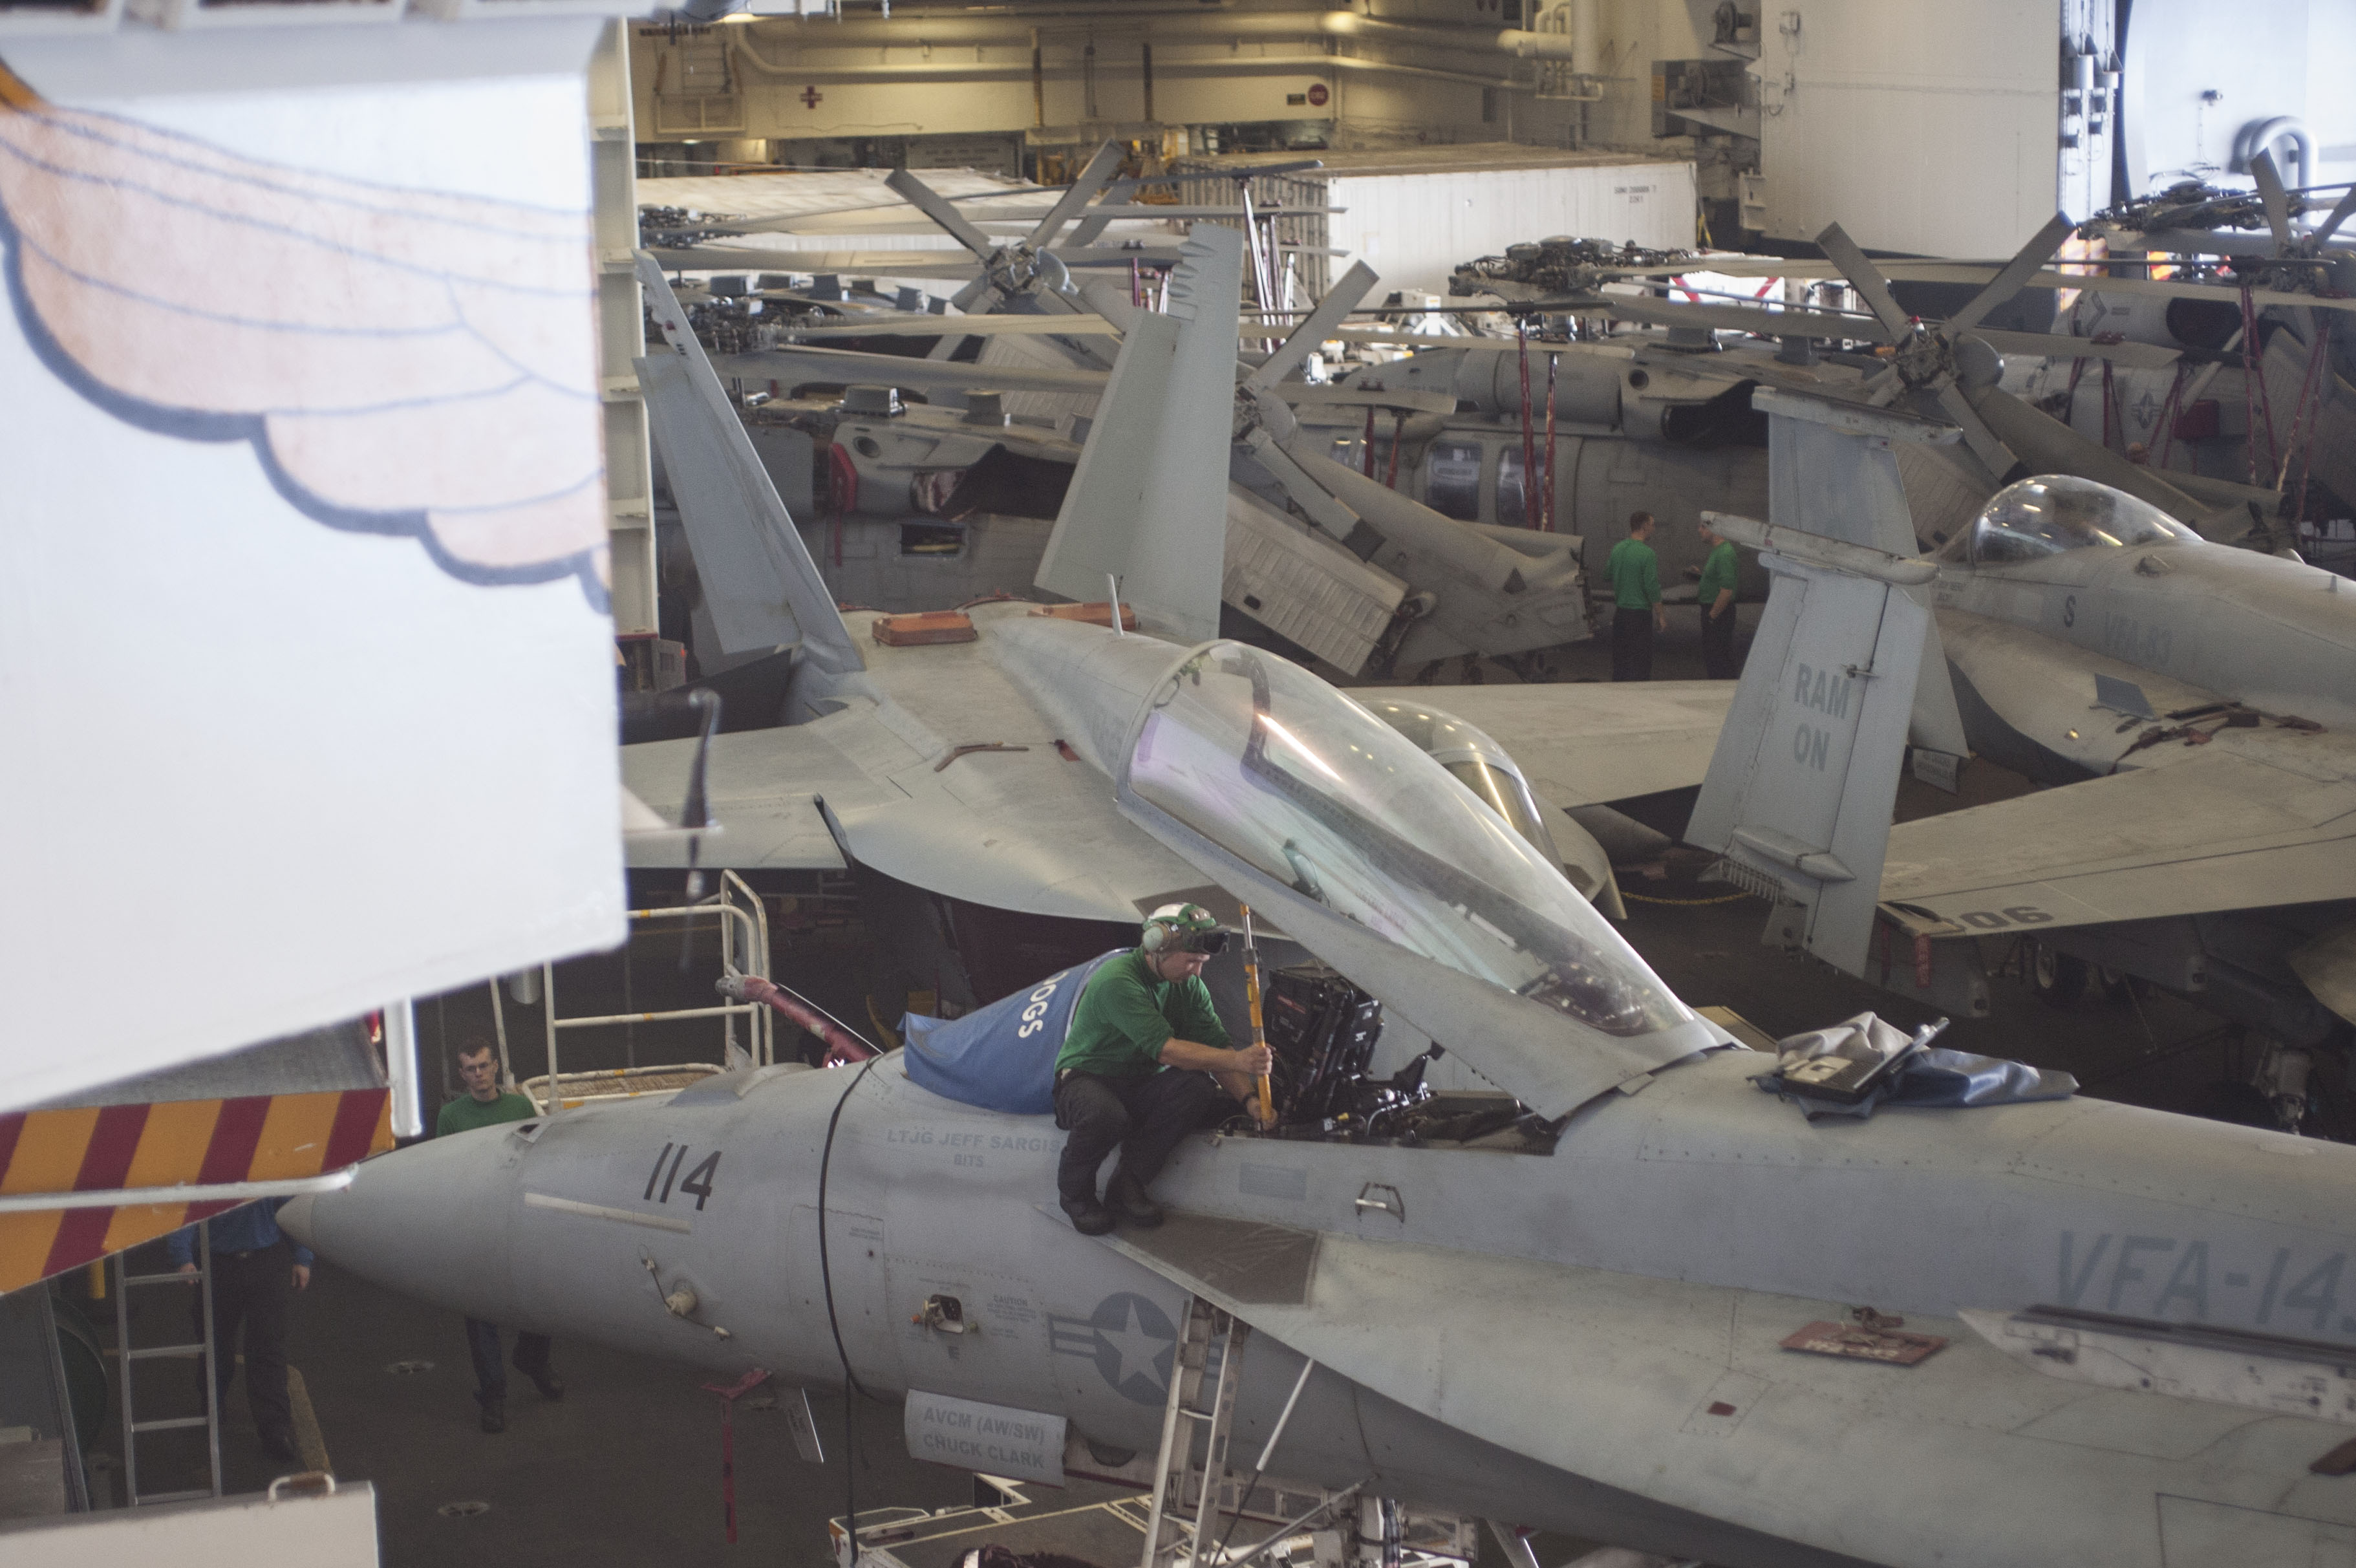 150617-N-OW828-023 ATLANTIC OCEAN (June 17, 2015) Aviation Structural Mechanic (Equipment) 2nd Class M. V. Volosko, assigned to the Pukin Dogs of Strike Fighter Squadron (VFA) 143, places a canopy brace on an F/A-18E Super Hornet in the hangar bay of the aircraft carrier USS Harry S. Truman (CVN 75). Harry S. Truman is underway conducting tailored ship’s training availability (TSTA) off the east coast of the United States. TSTA is the first combined training event of a ship's inter-deployment training cycle that tests and evaluates shipboard drills, including general quarters, damage control, medical and firefighting. Upon successful completion of TSTA, Harry S. Truman will be considered proficient in all mission areas. (U.S. Navy photo by Mass Communication Specialist Seaman J. A. Mateo/Released)